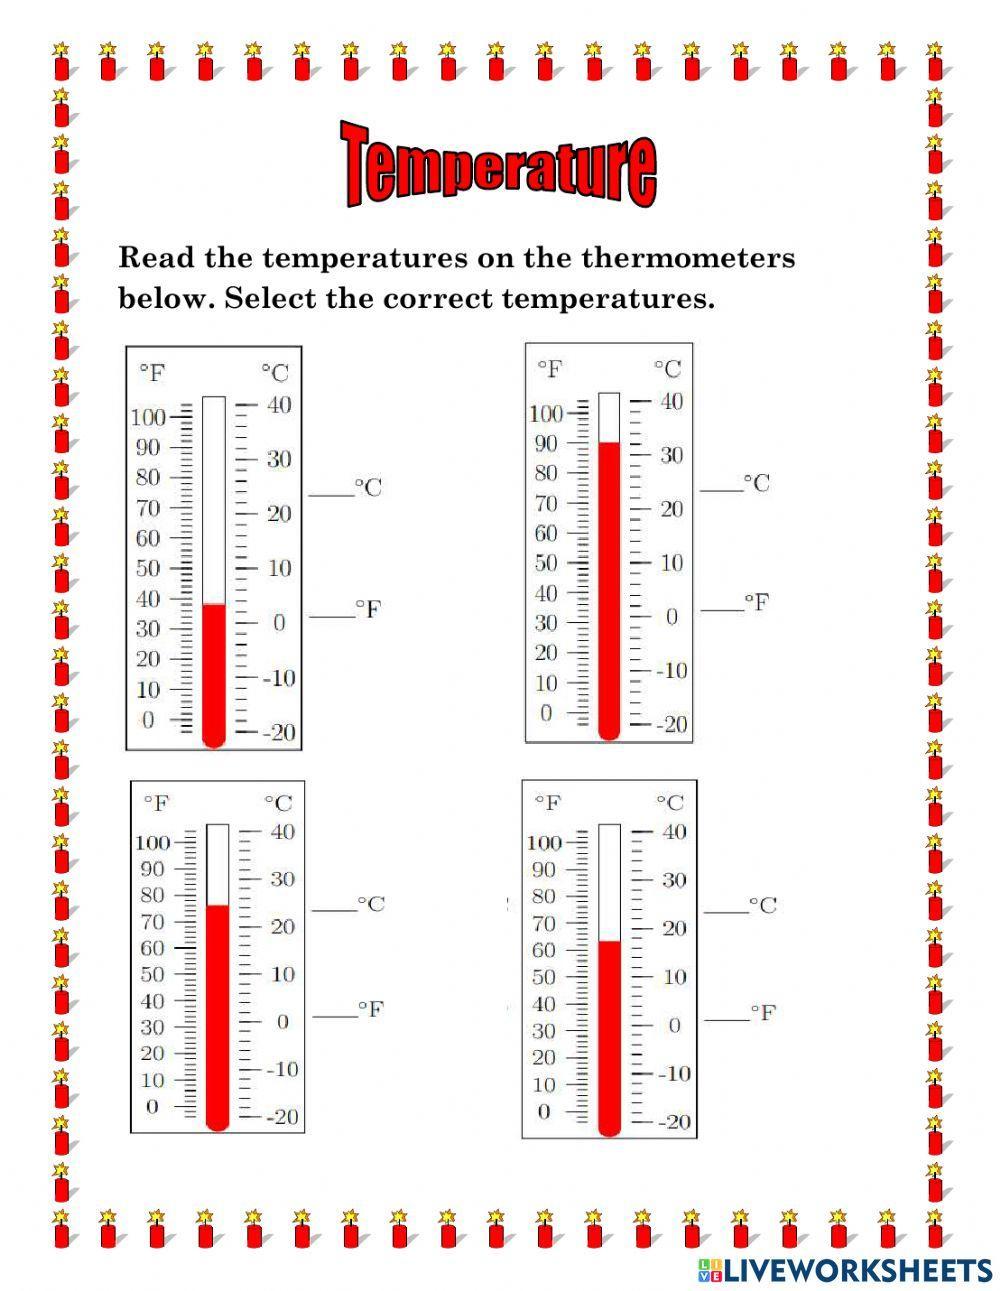 Temperature and Reading a Thermometer